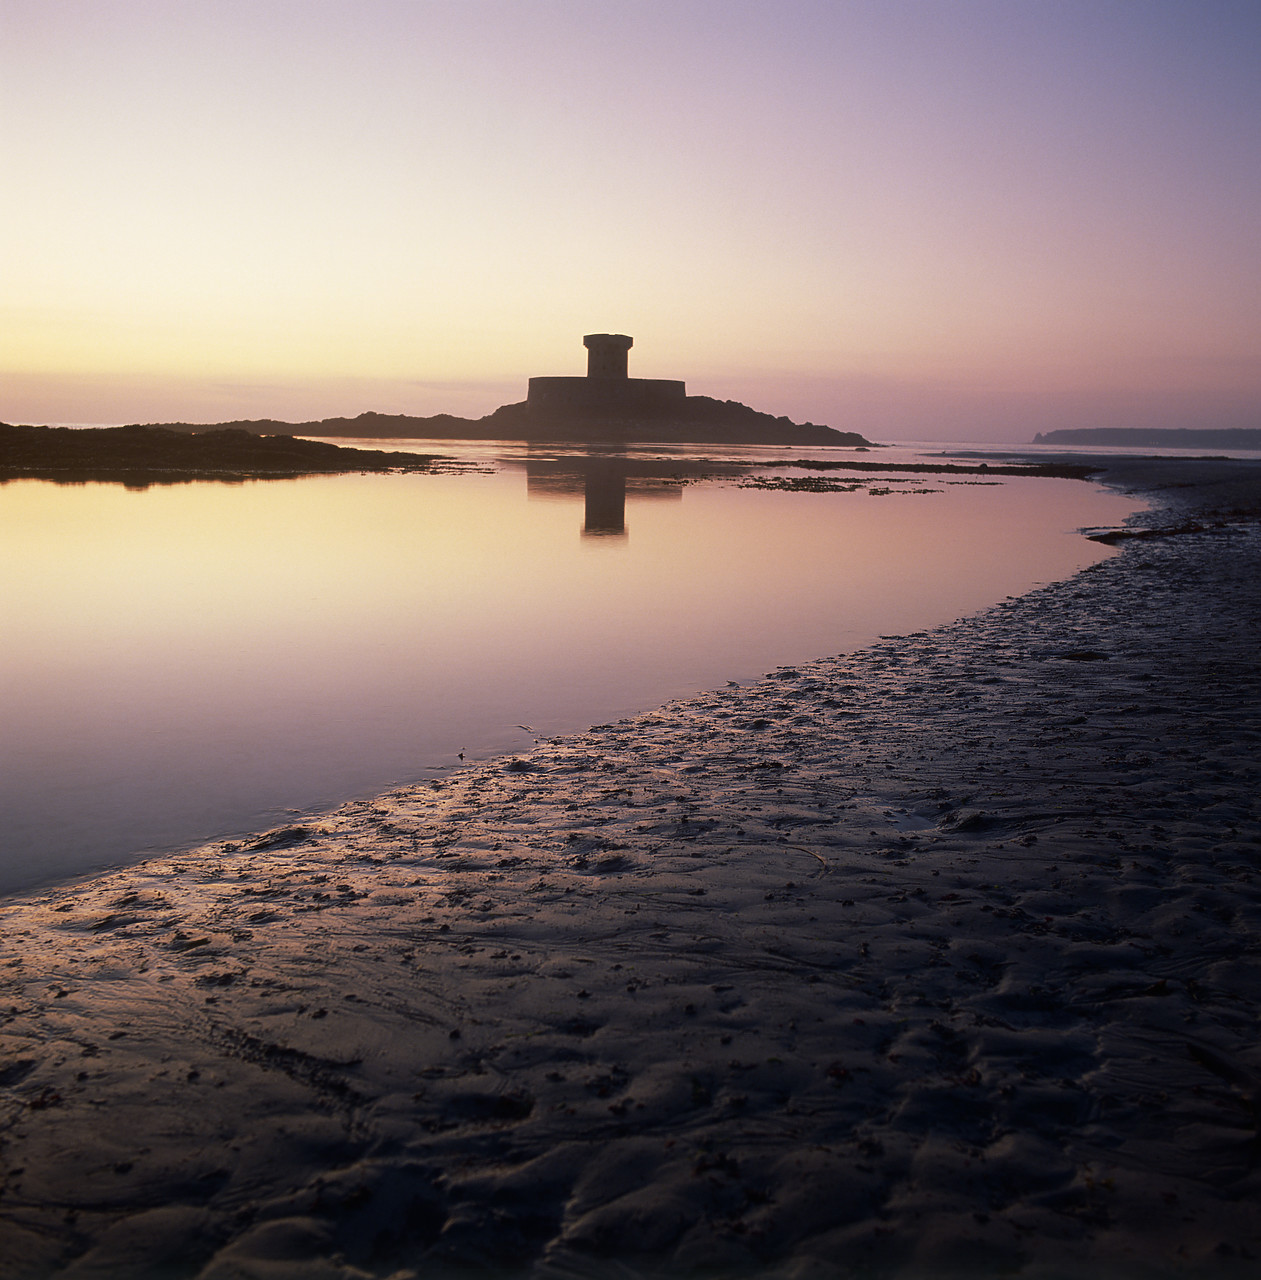 #934501-1 - La Rocca Tower at Sunset, Jersey, Channel Islands